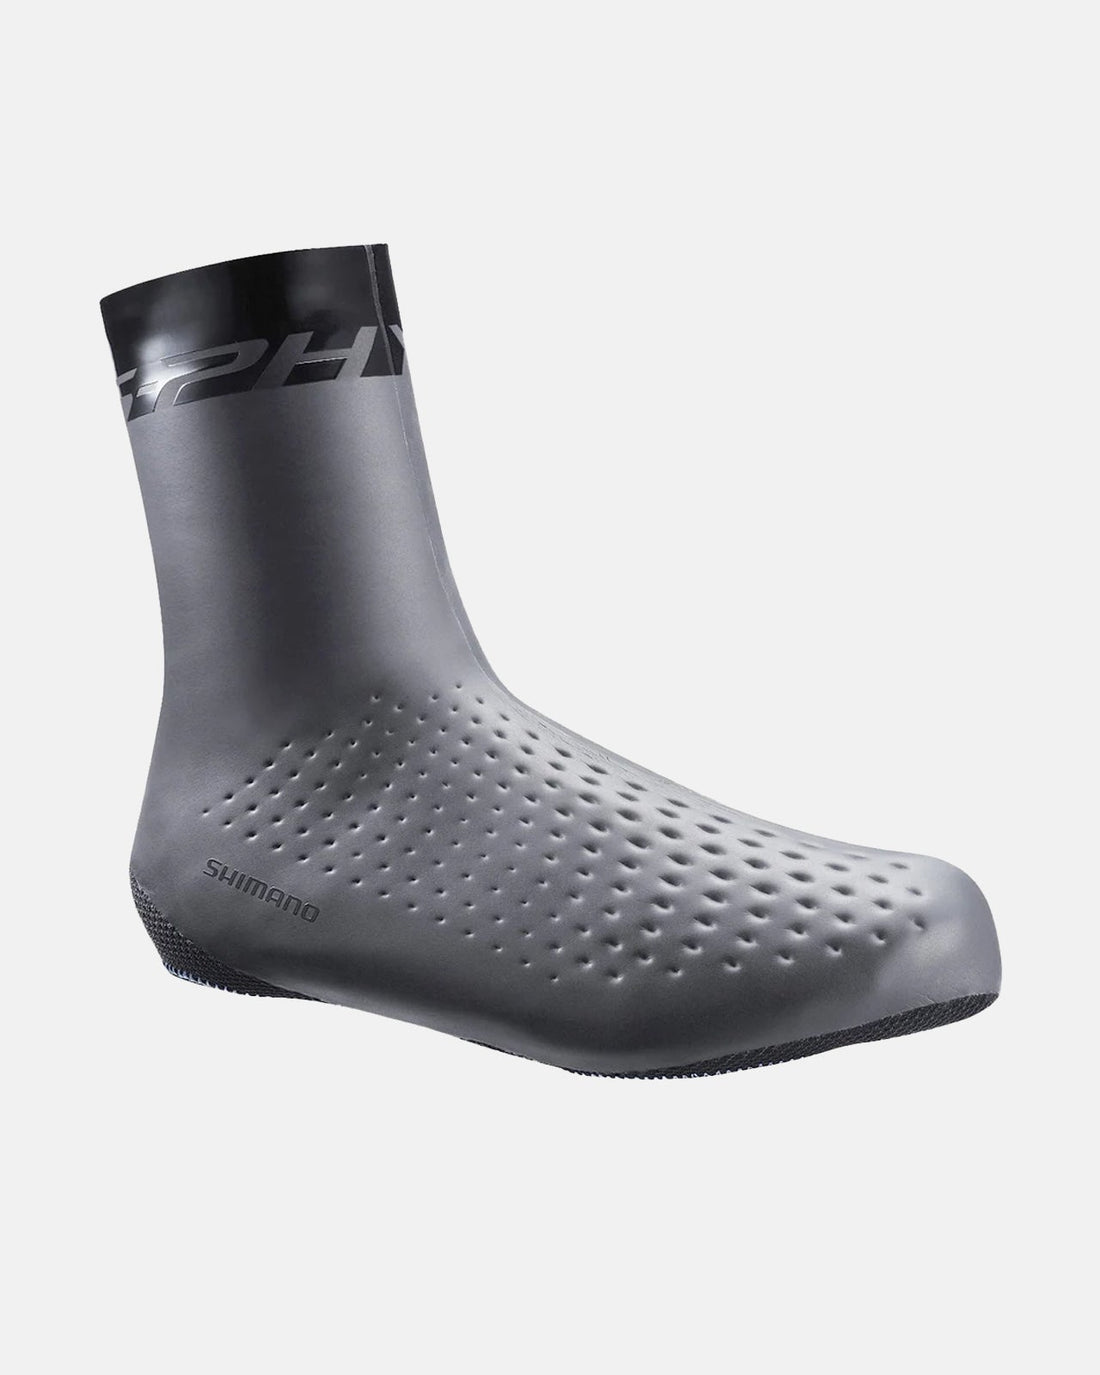 S-PHYRE Insulated Shoe Covers - S-Phyre